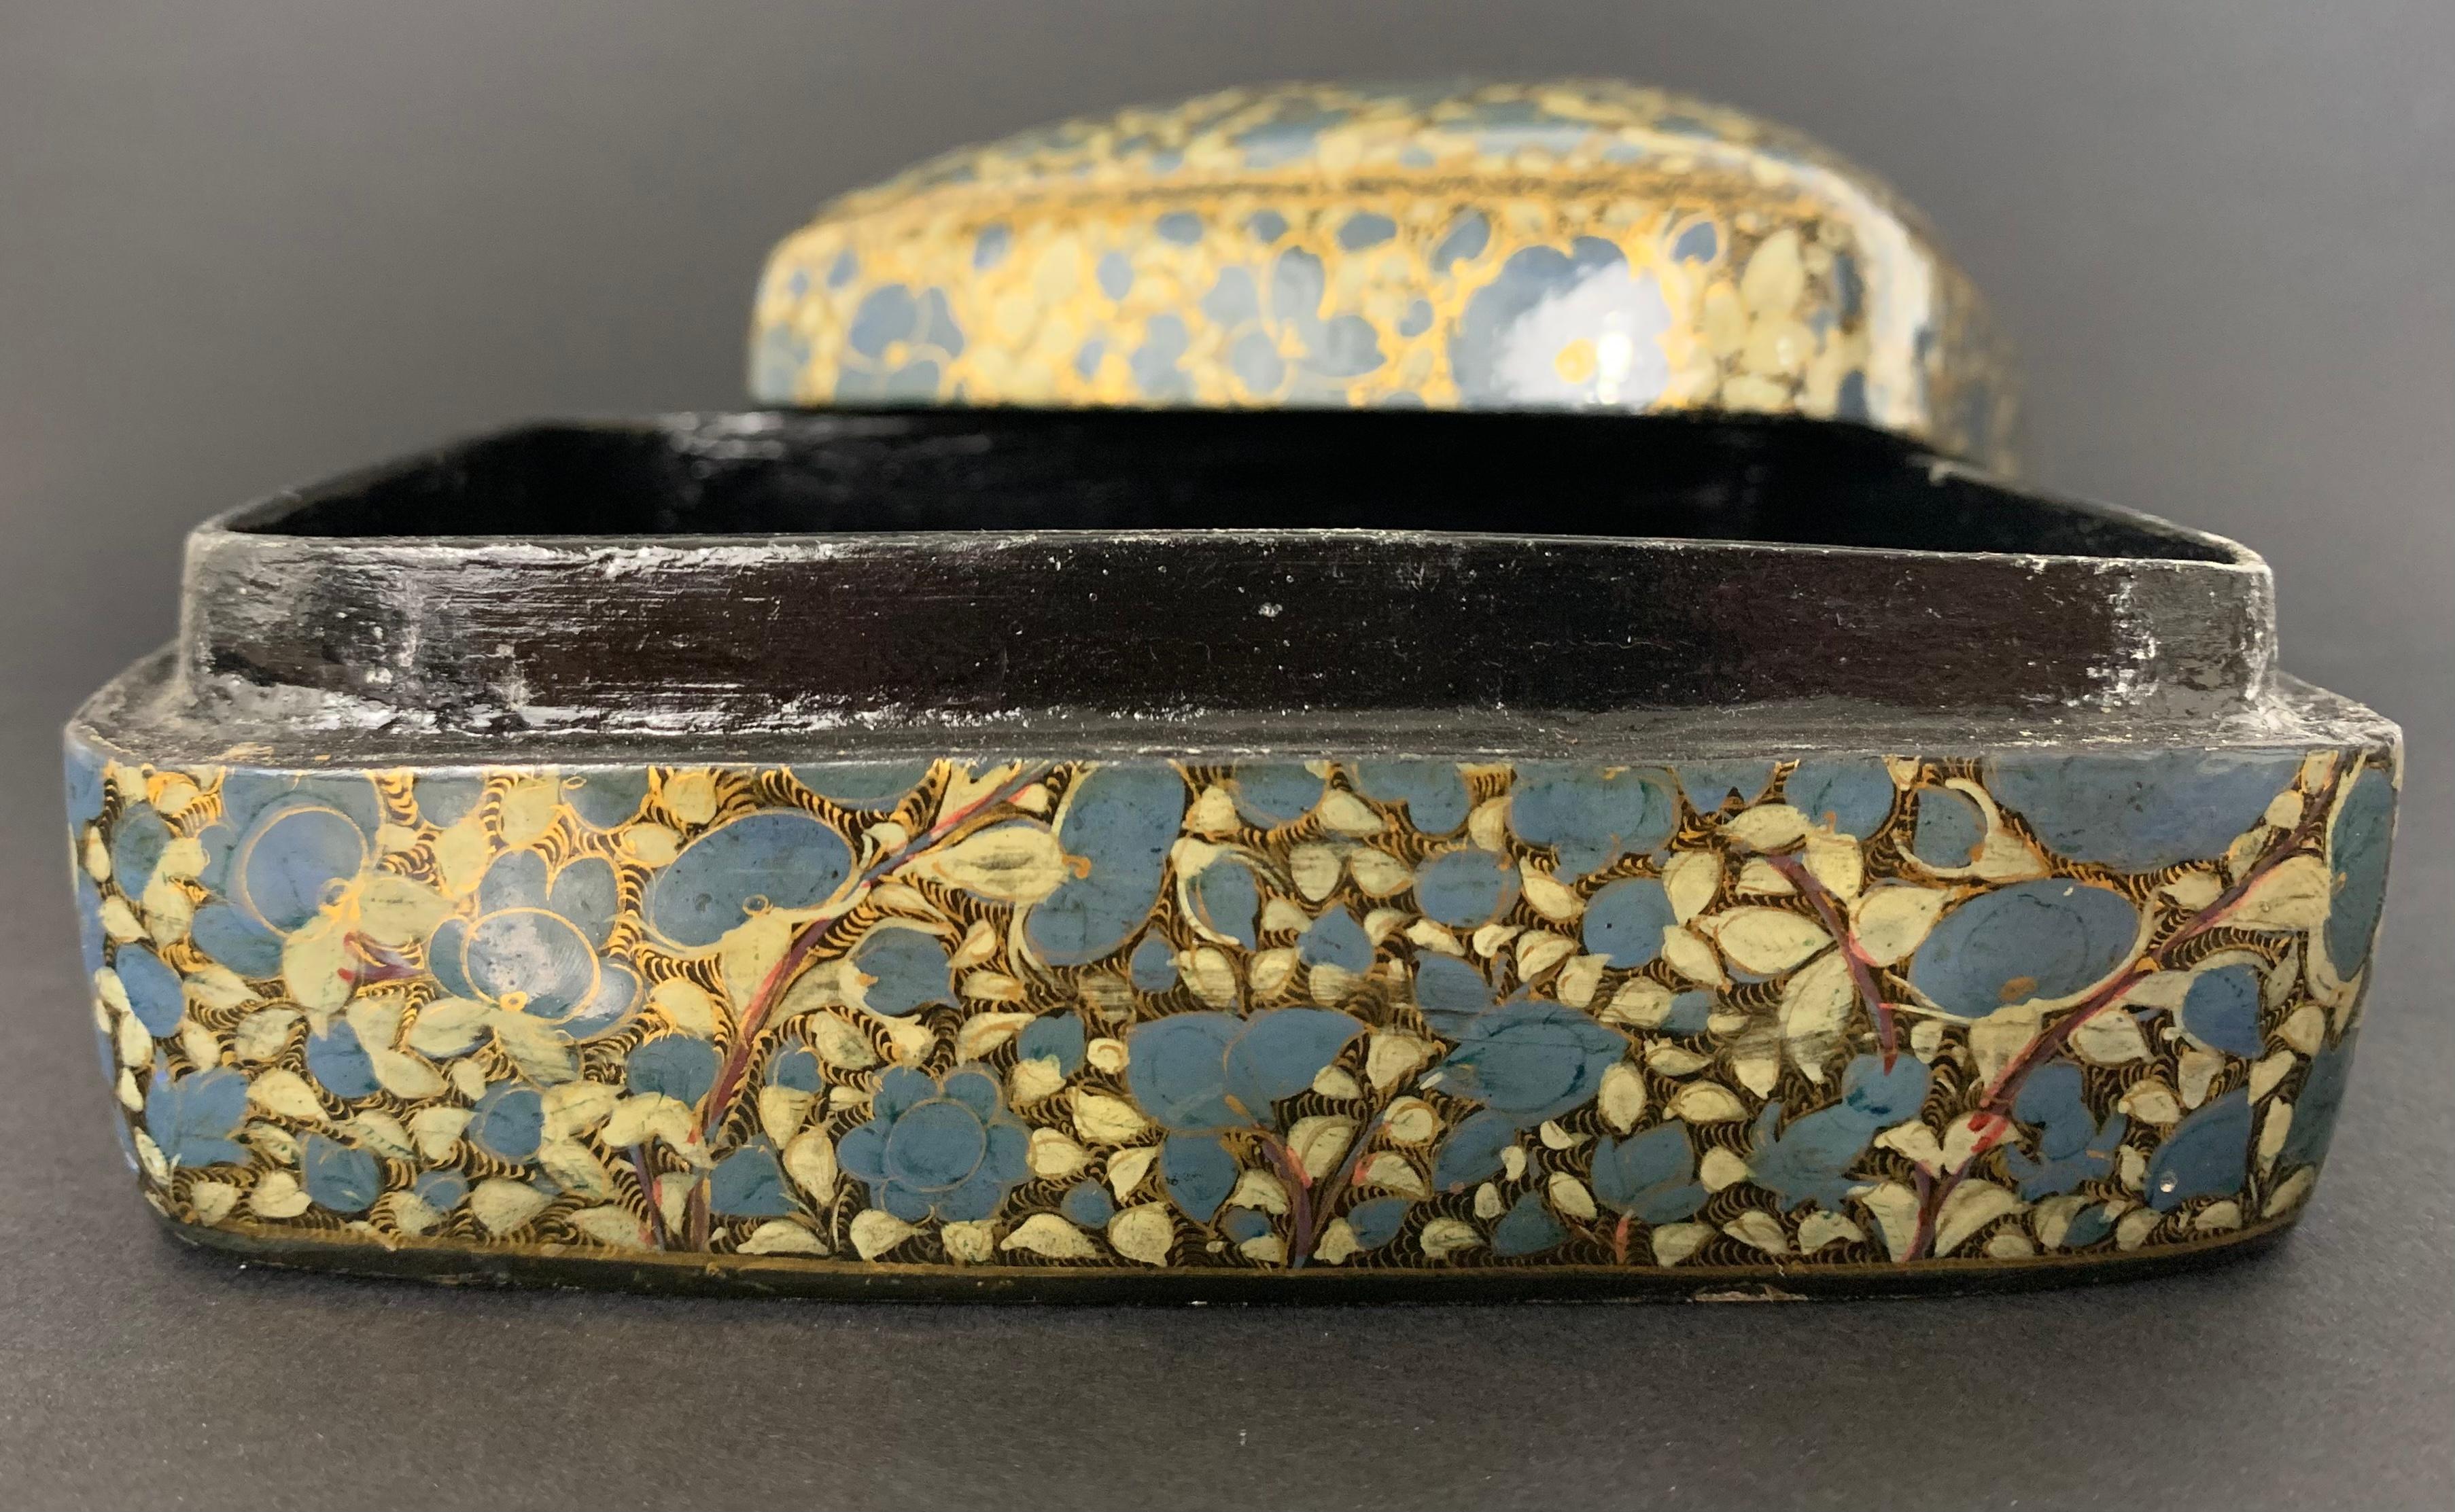 20th Century Japanese Lacquer Box with Blue Flowers, circa 1900